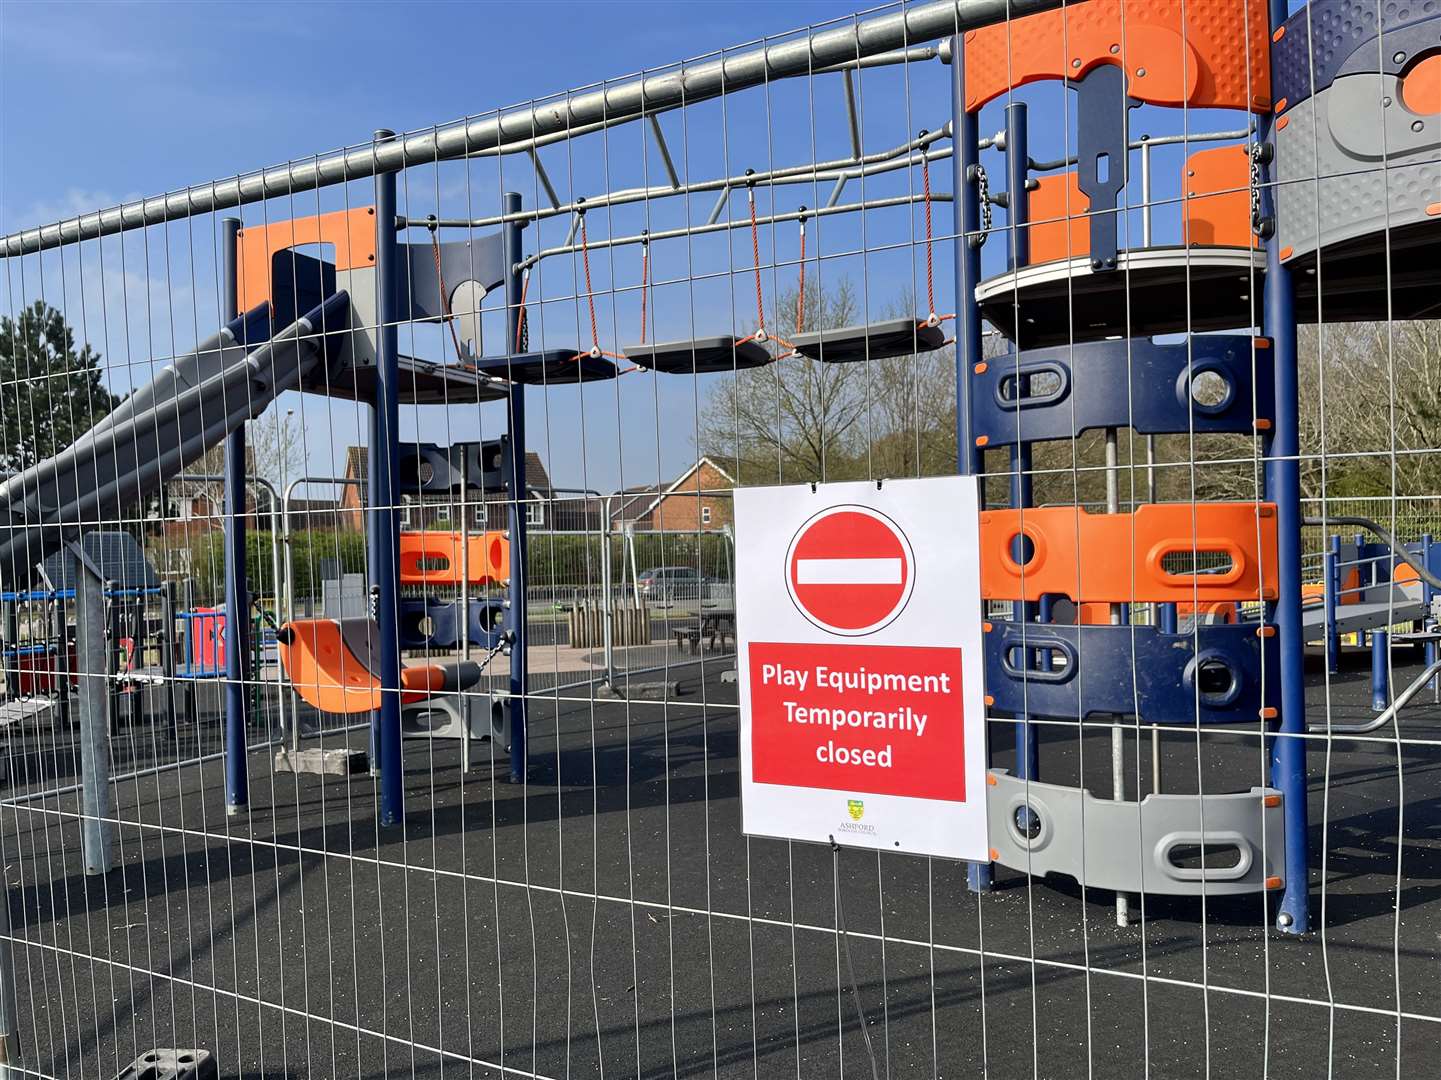 Part of the play area is fenced off with a sign saying 'play equipment temporarily closed'